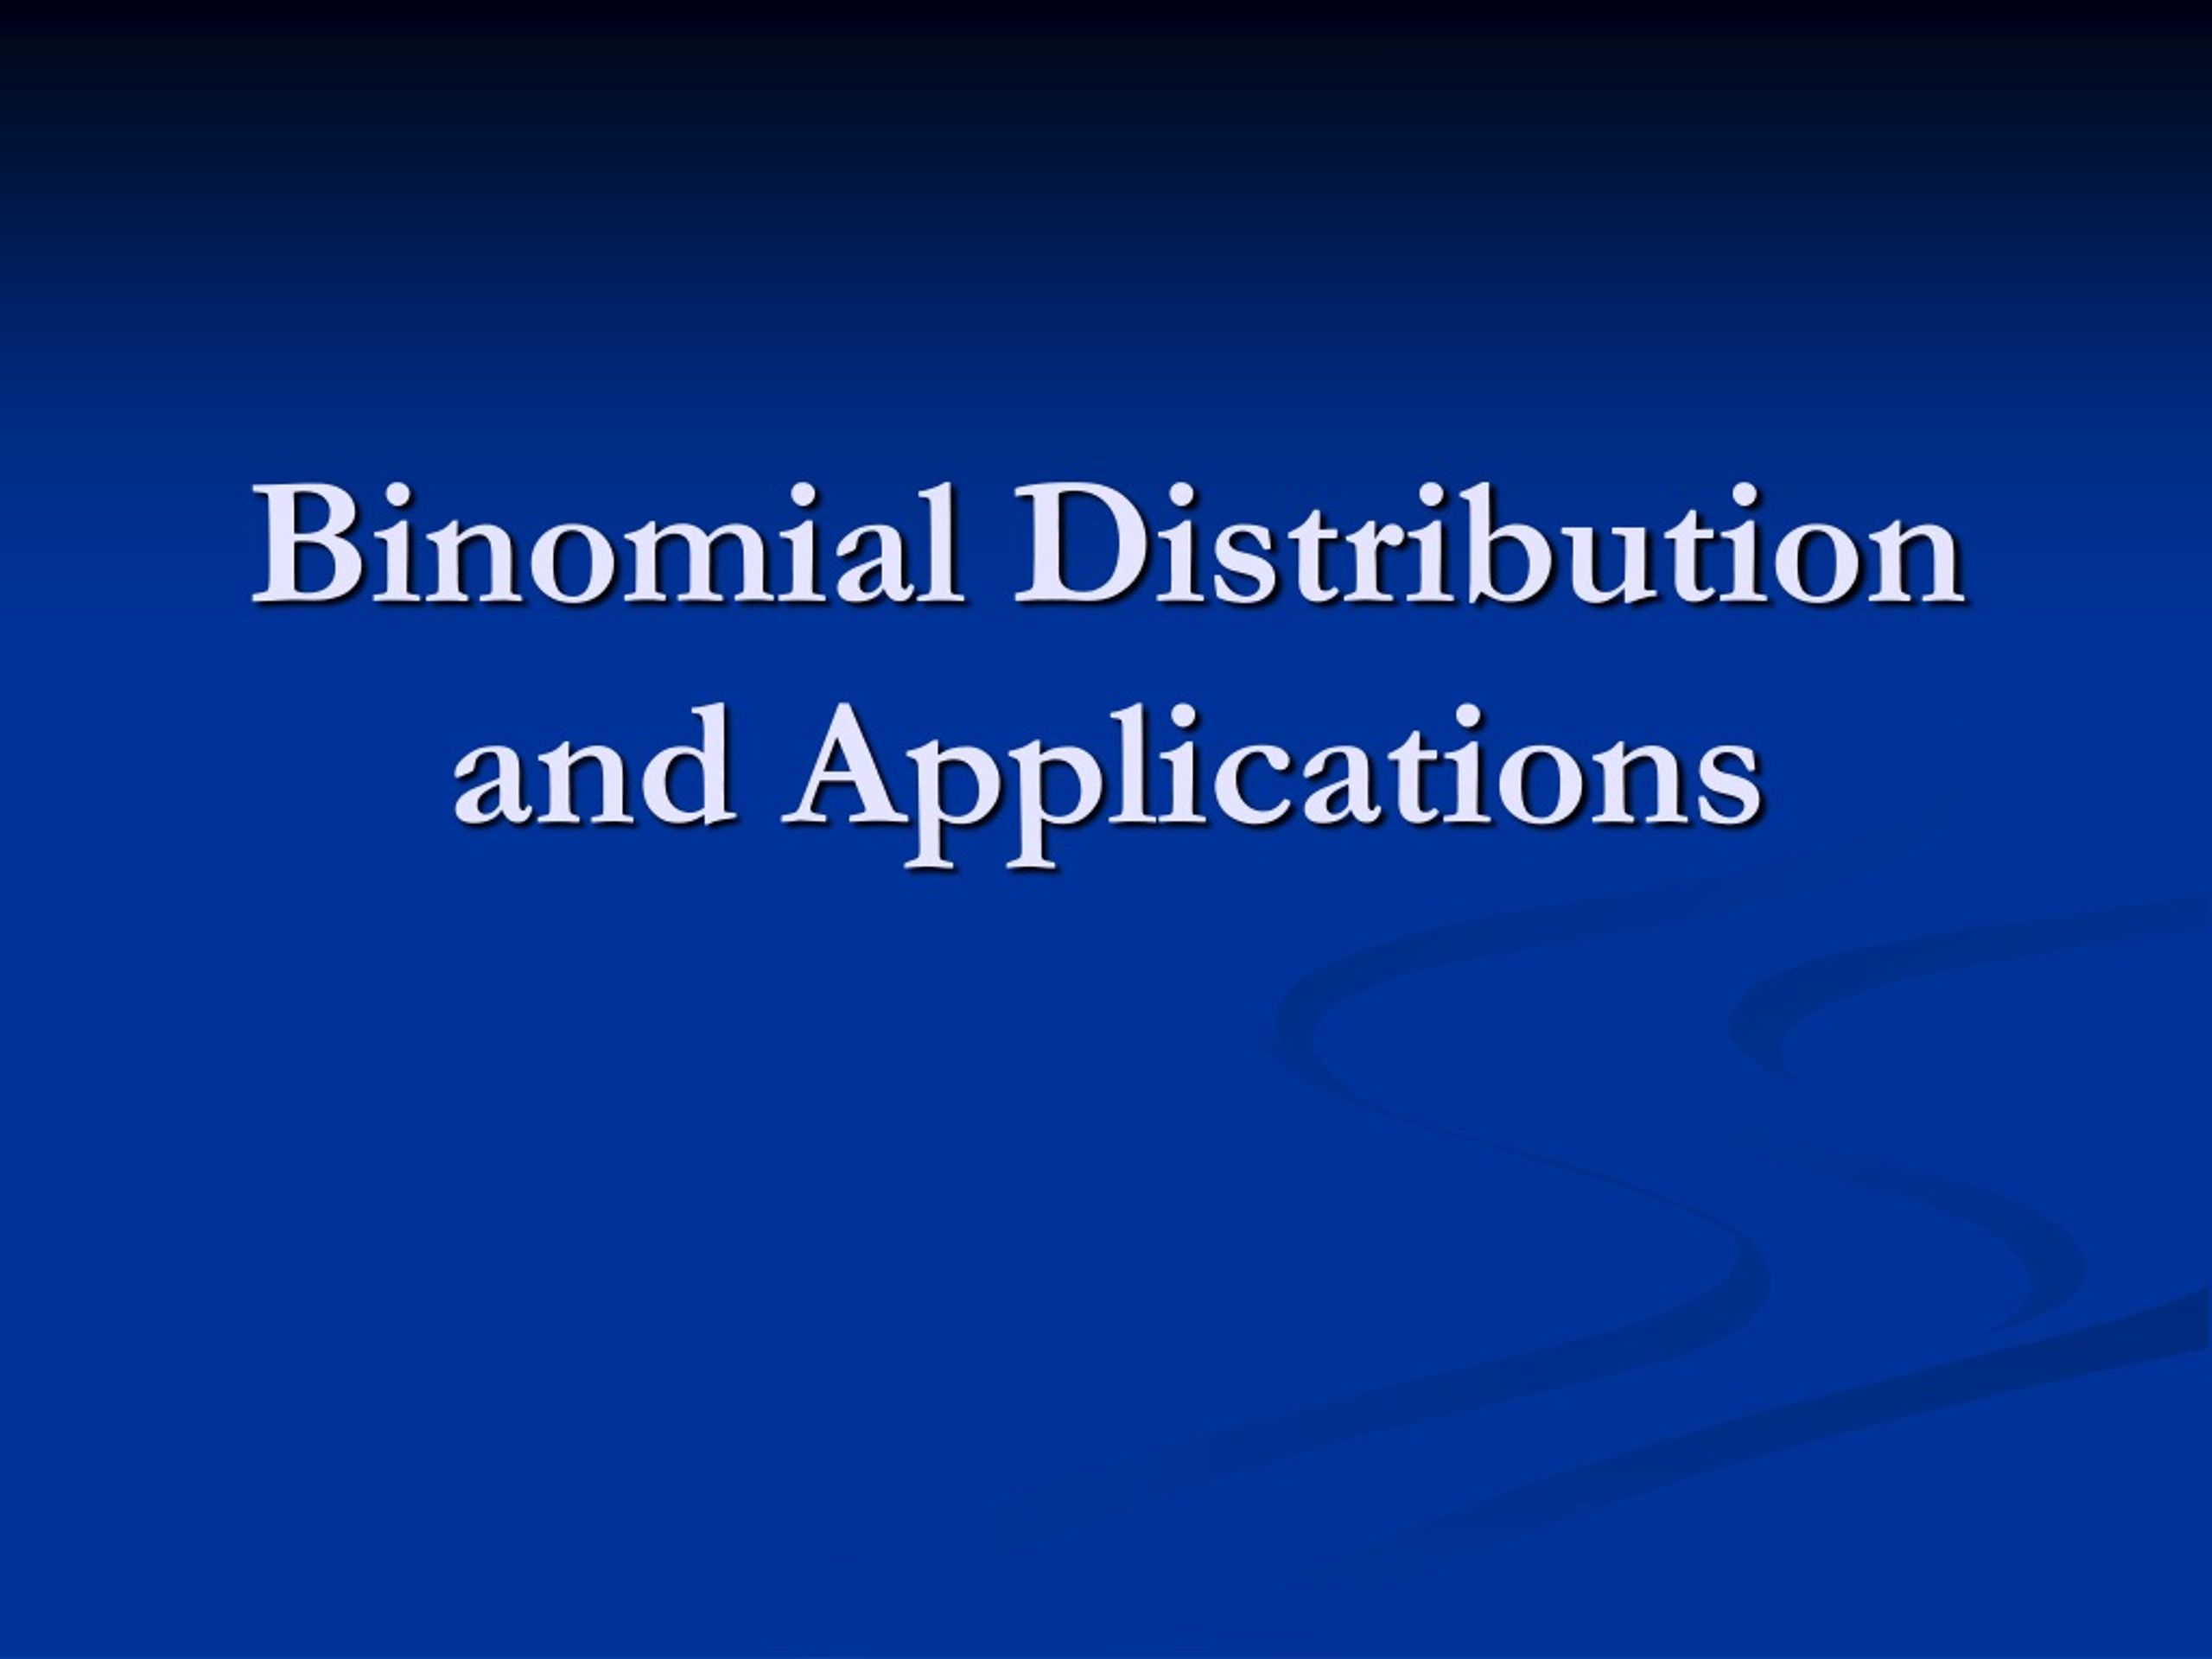 Ppt Binomial Distribution And Applications Powerpoint Presentation Free Download Id9143947 8011